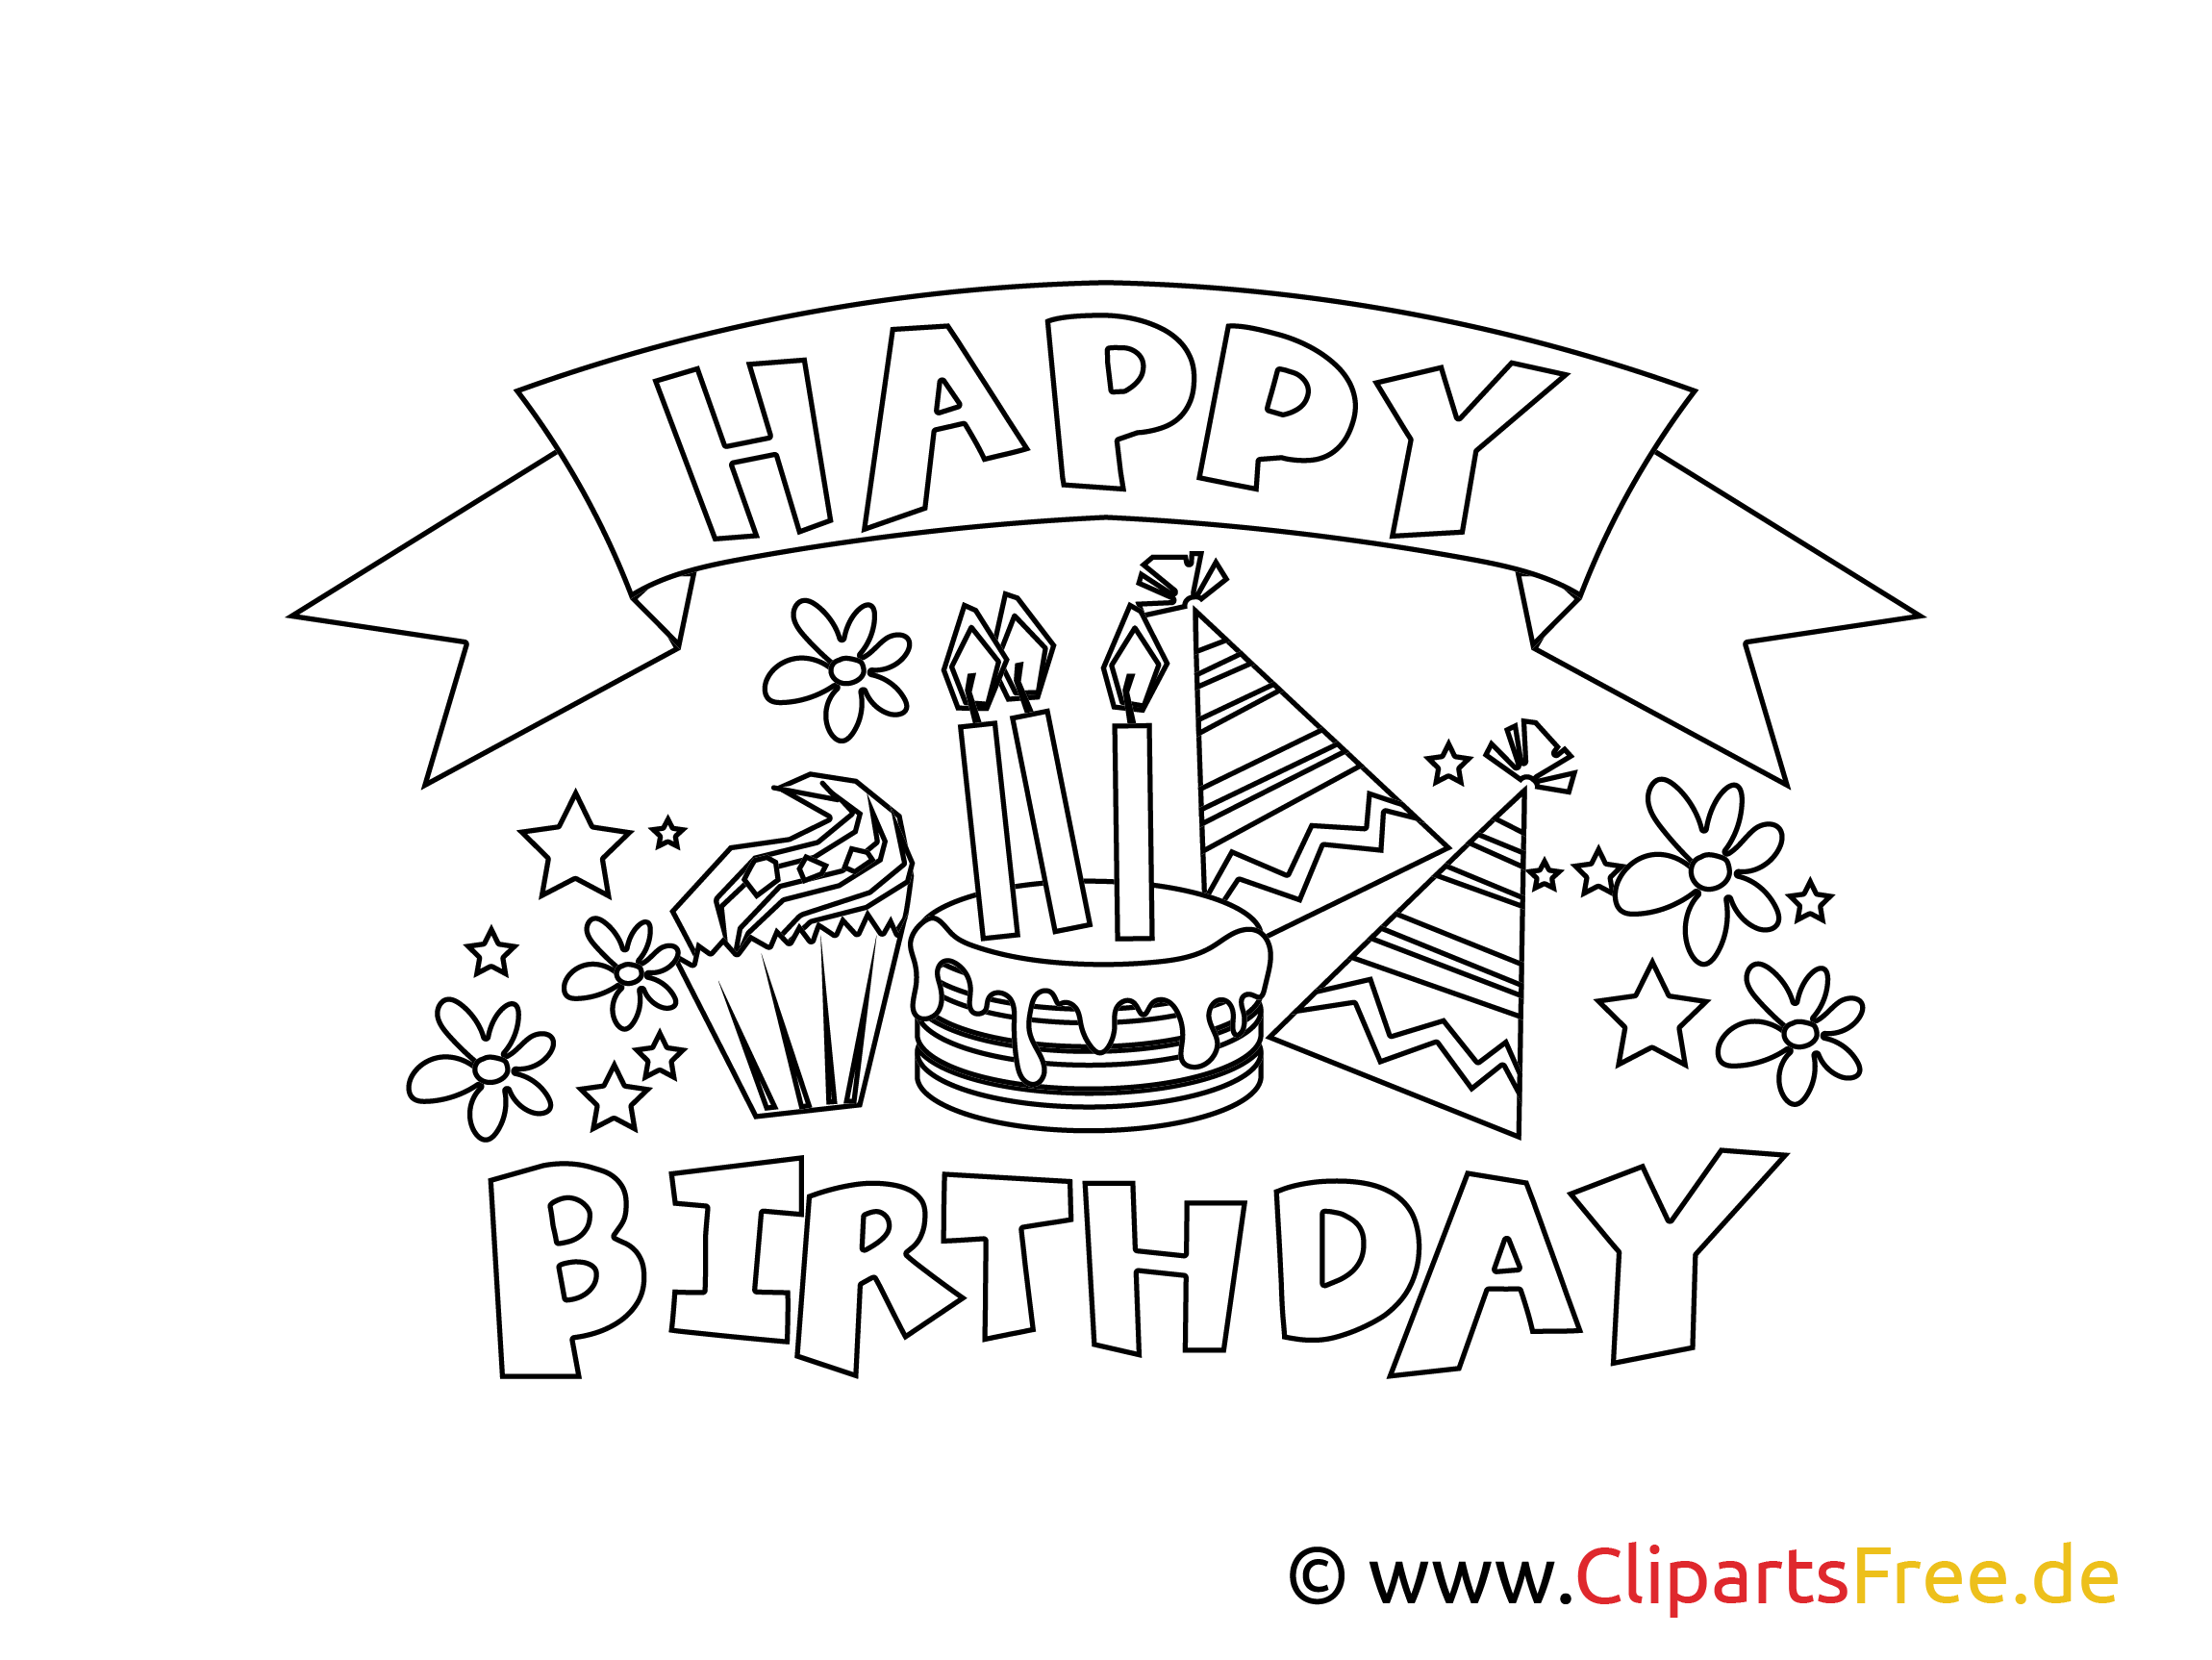 birthday colouring page